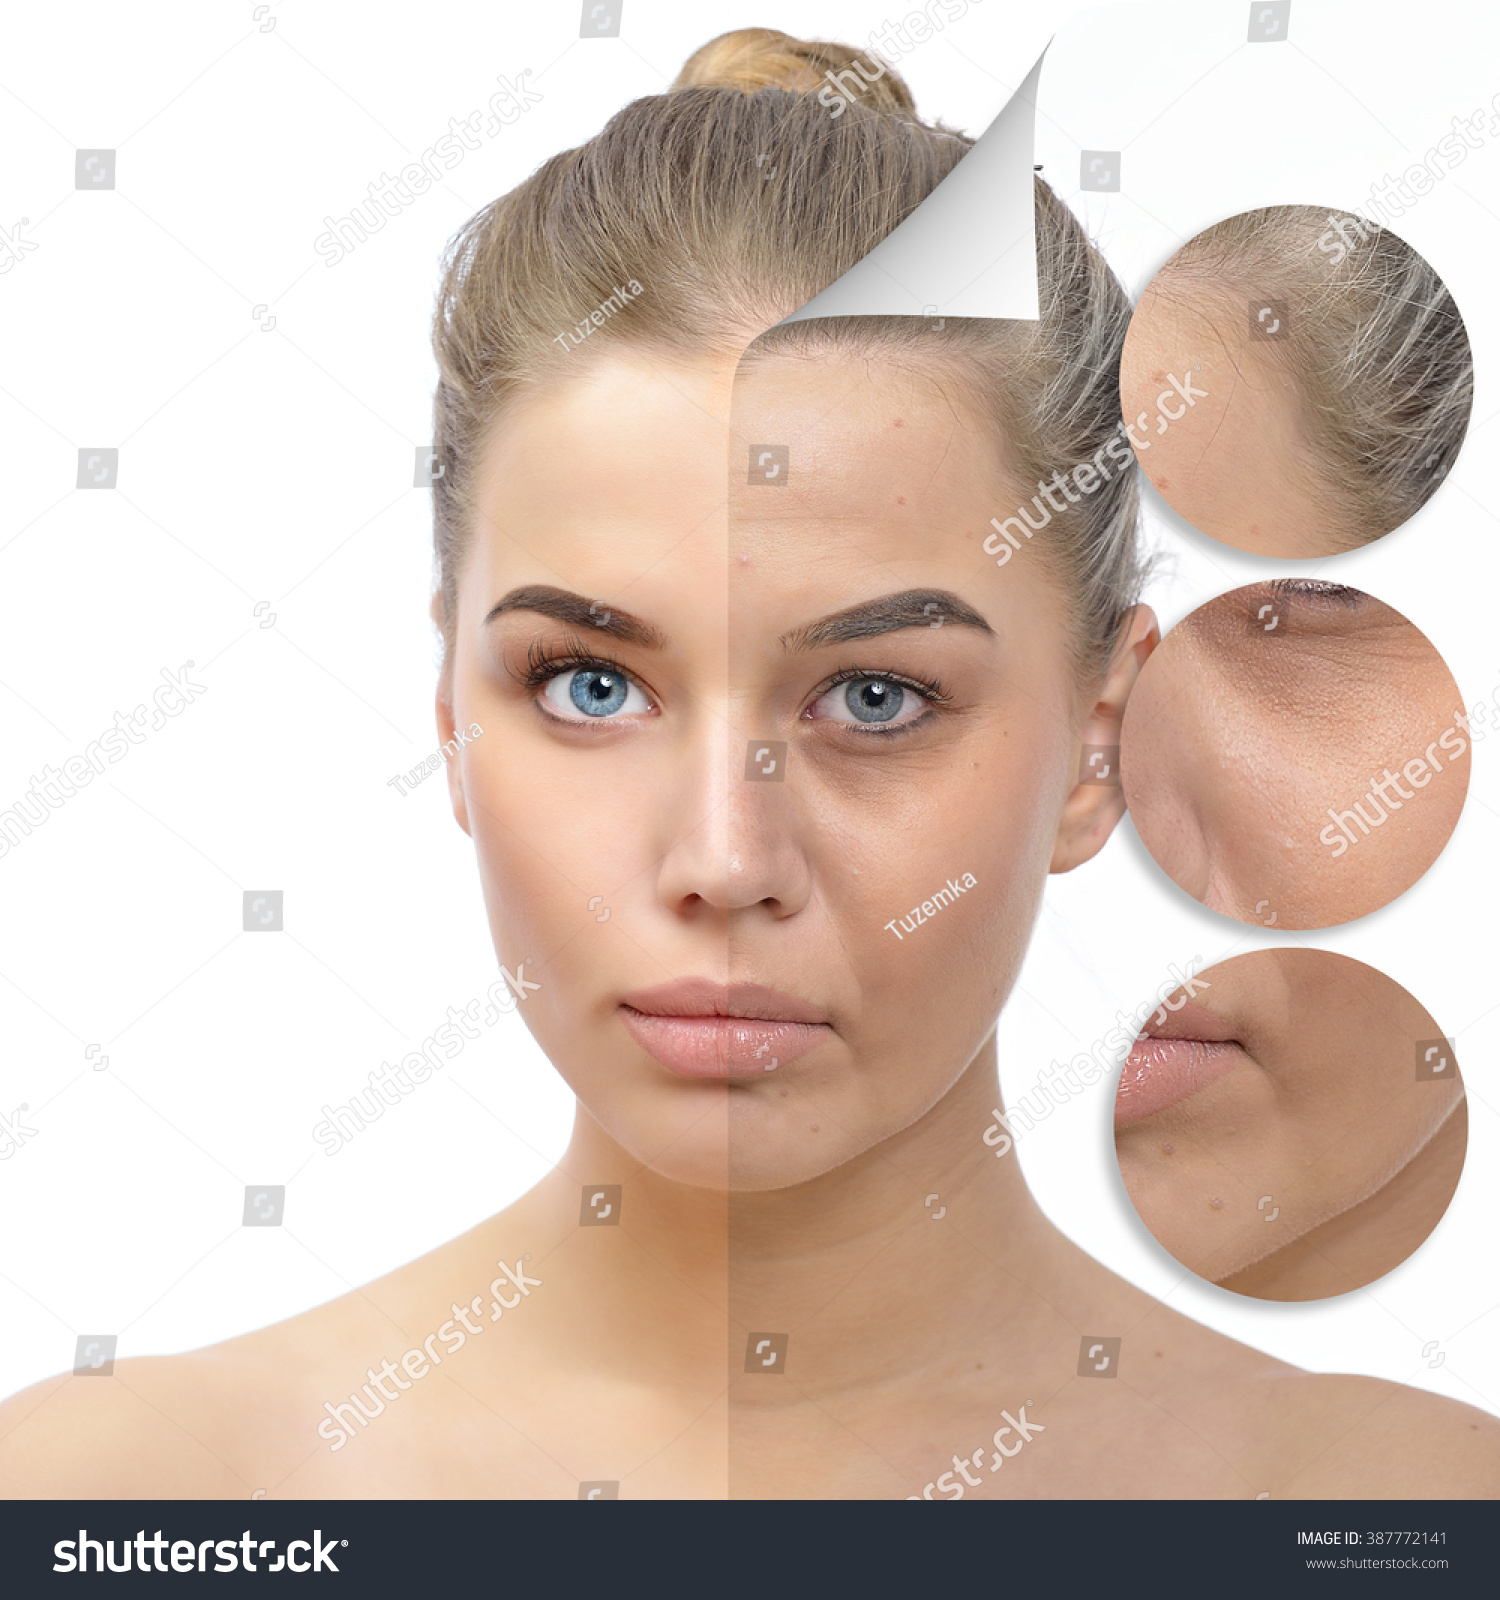 Antiaging Concept Beautiful Woman Problem Clean Stock Photo 387772141
Shutterstock